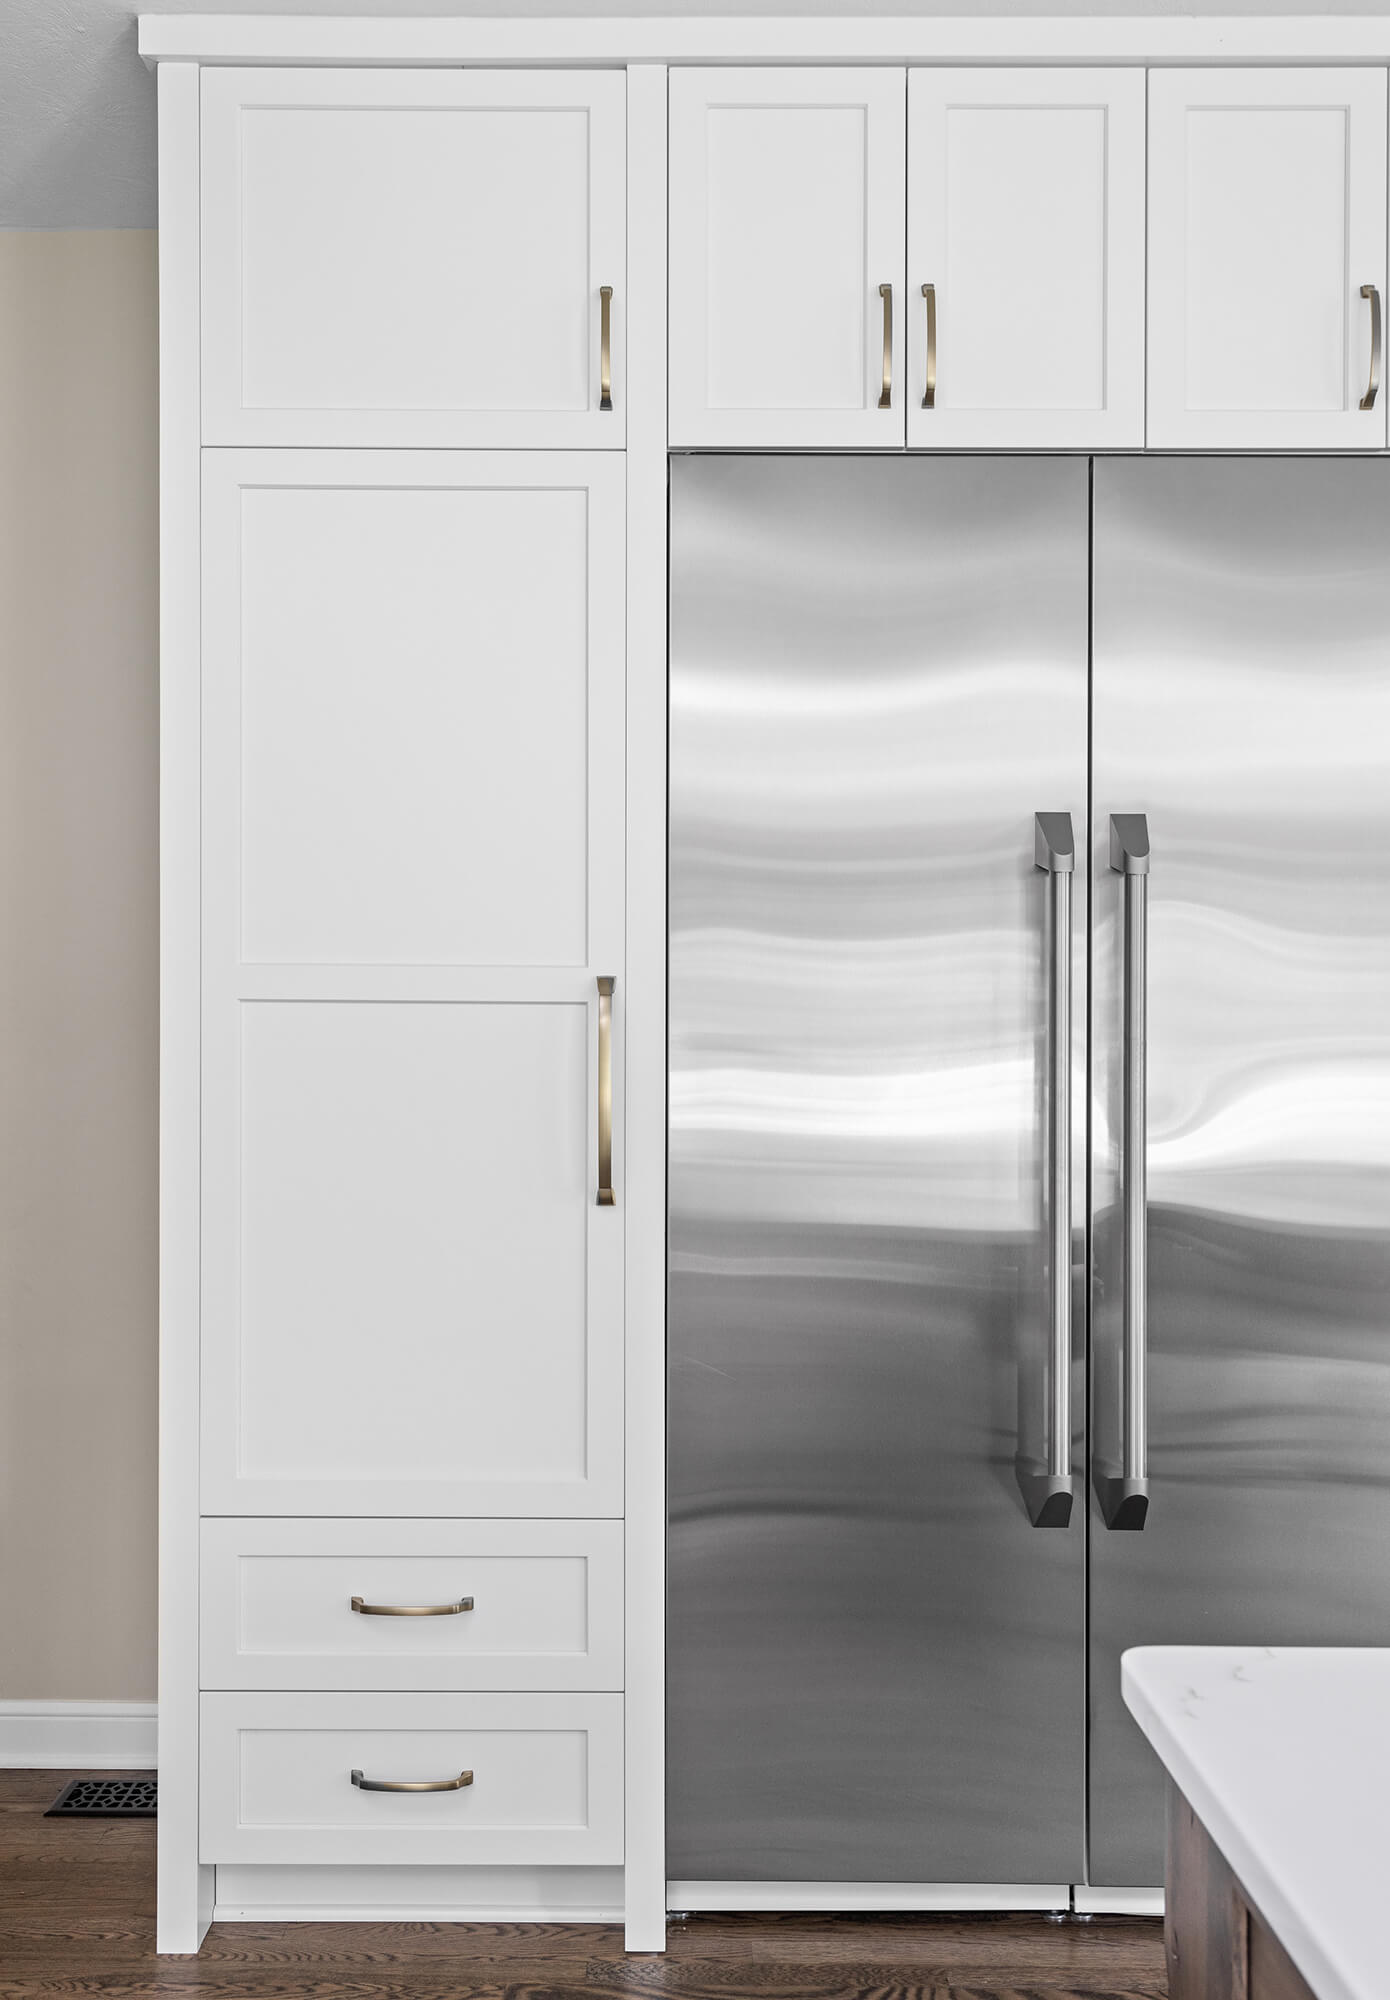 White shaker cabinetry around a stainless steel fridge.